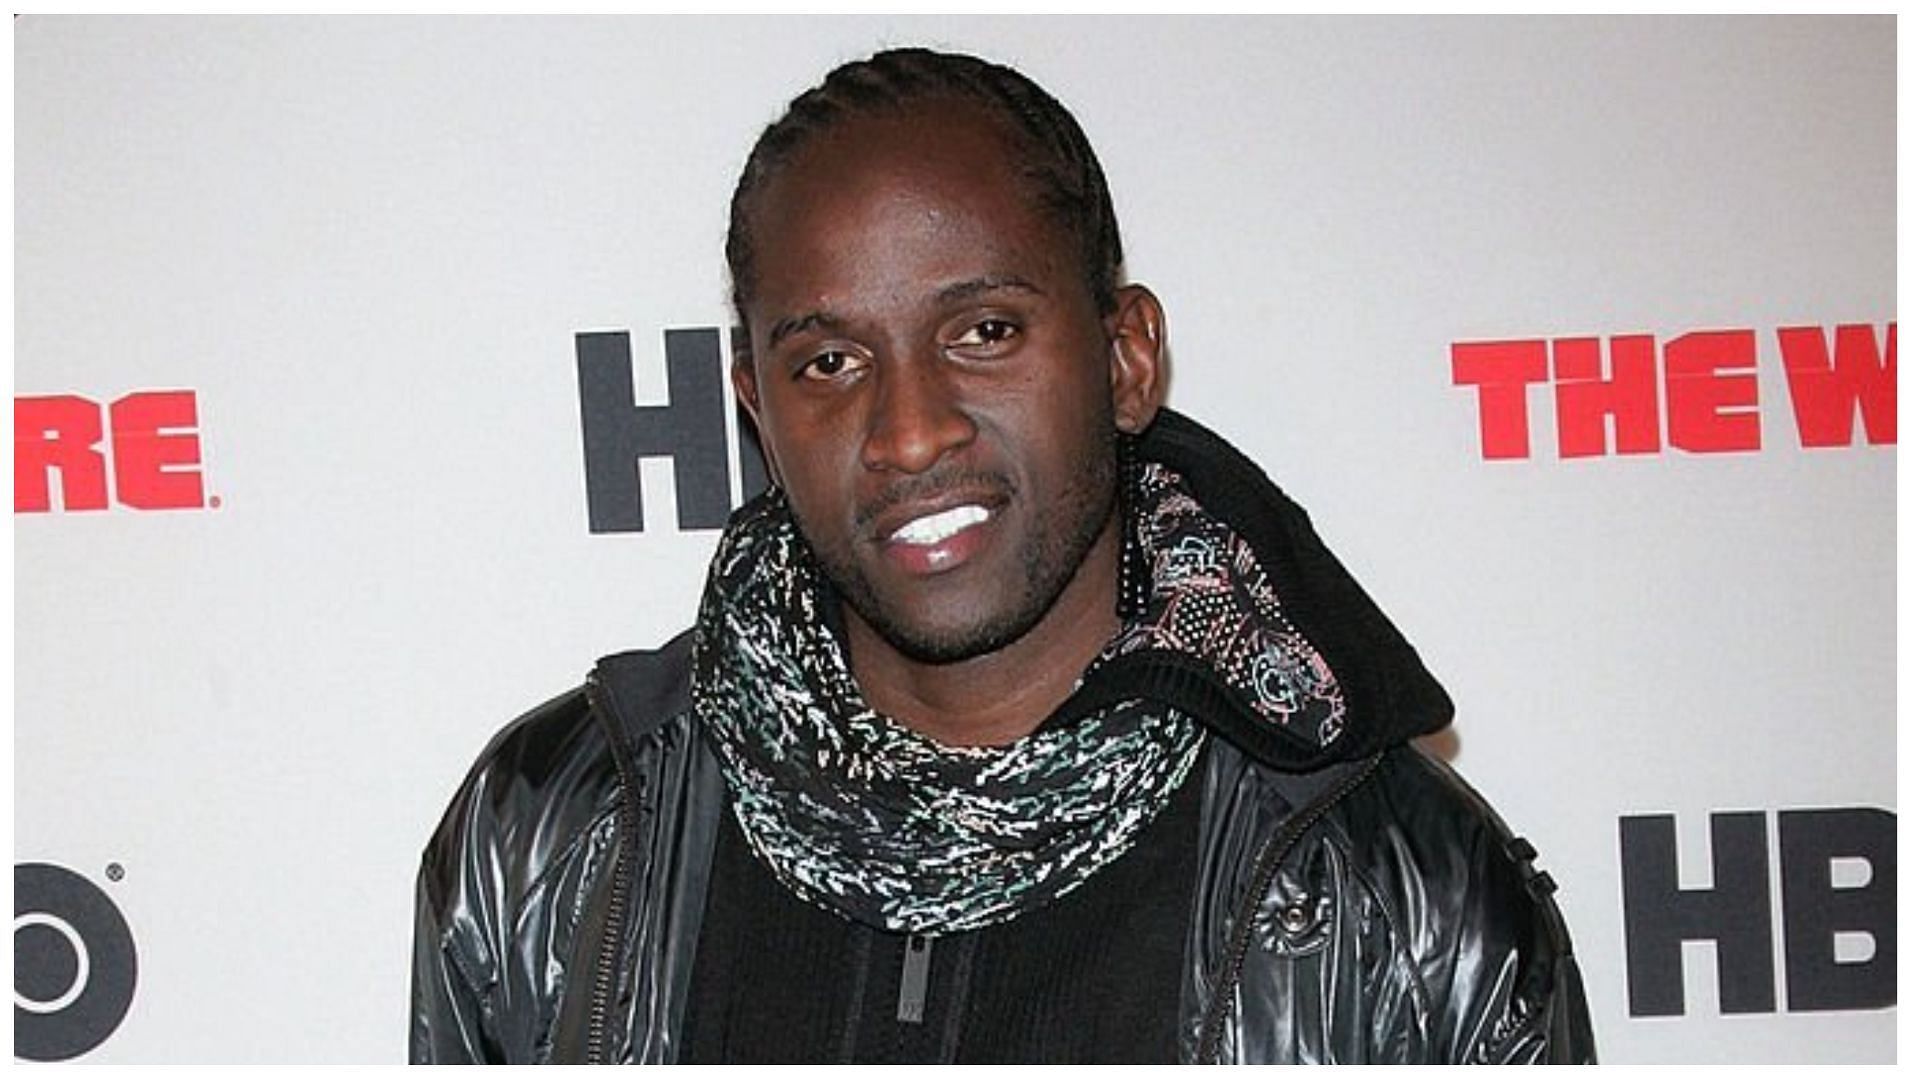 Anwan Glover is a well-known rapper, actor, model and DJ (Image via Jim Spellman/Getty Images)